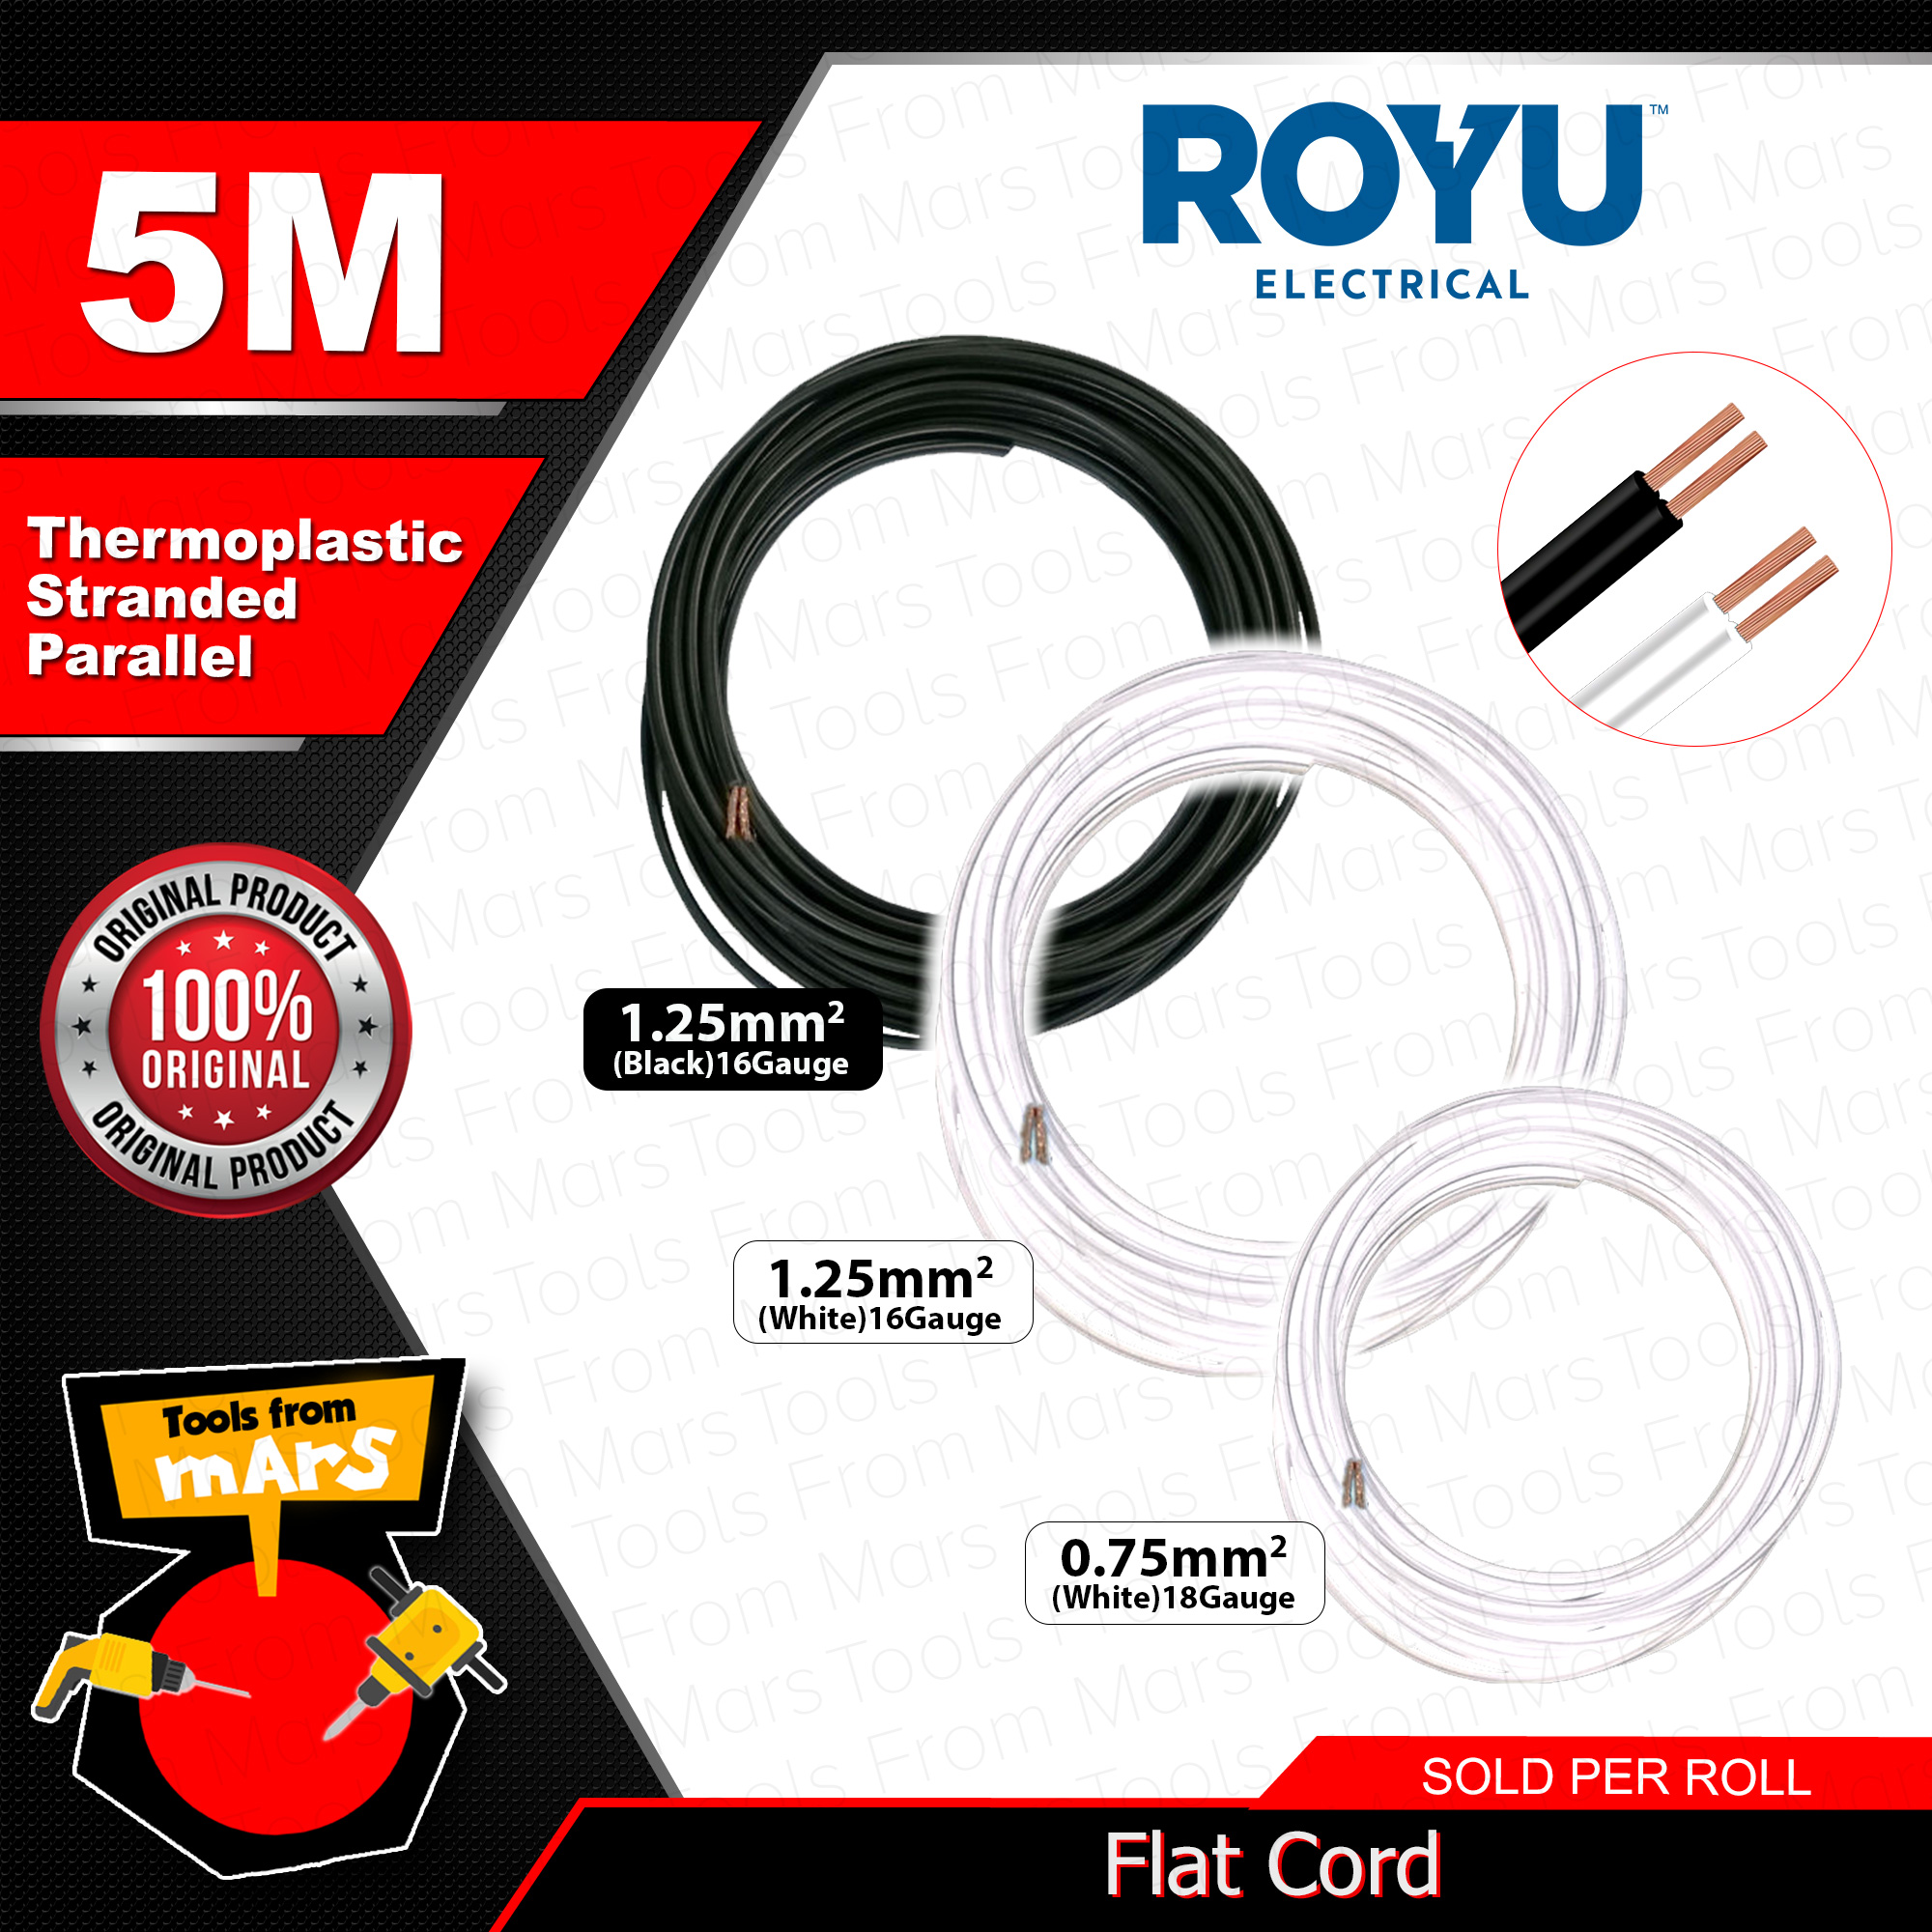 ROYU FLAT CORD WIRE #16 150M/BOX - One-Stop Shop Home Improvement Store  Philippines